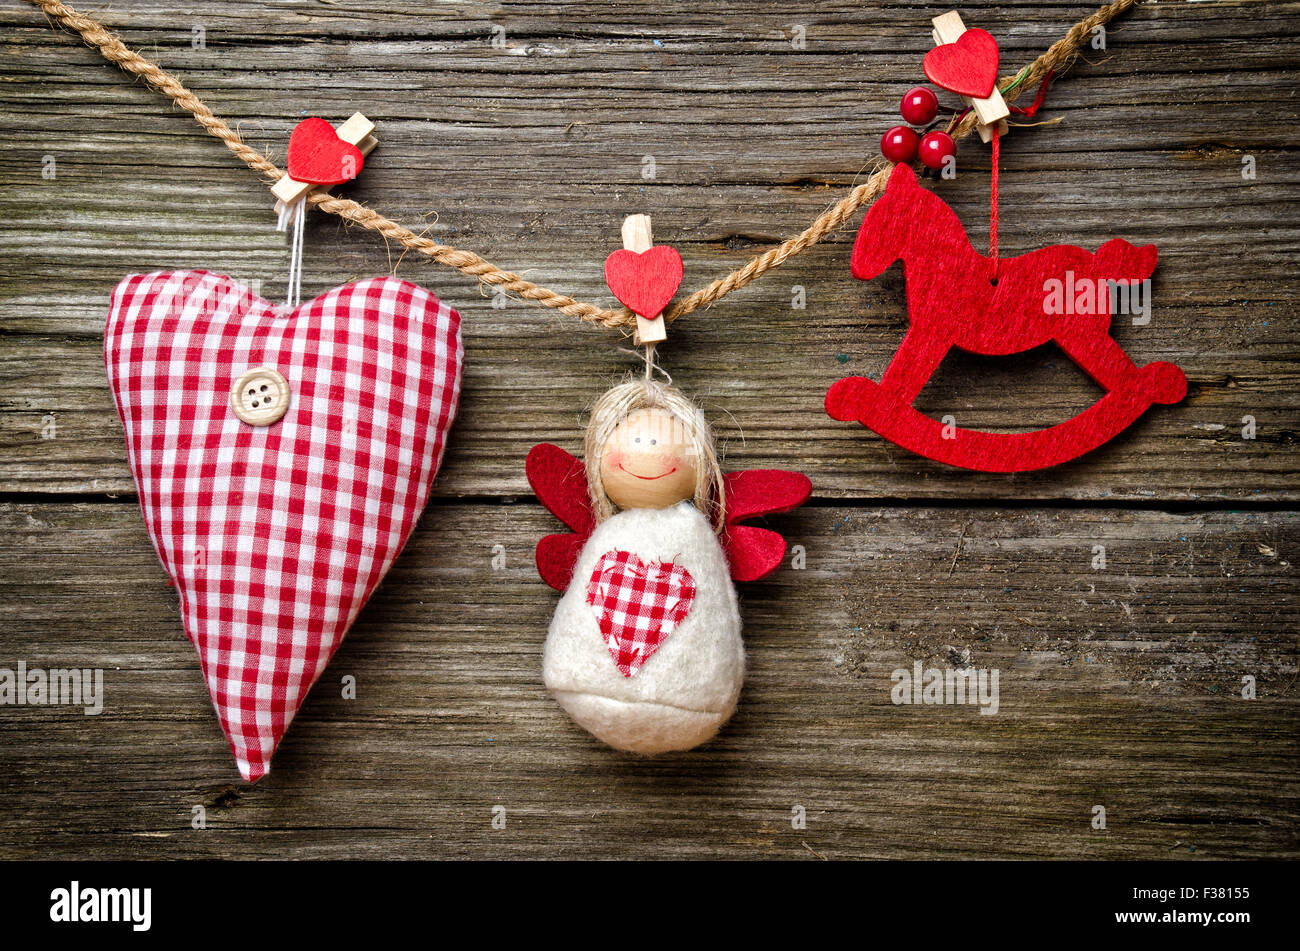 Cloth simple ornament, on wooden background Stock Photo